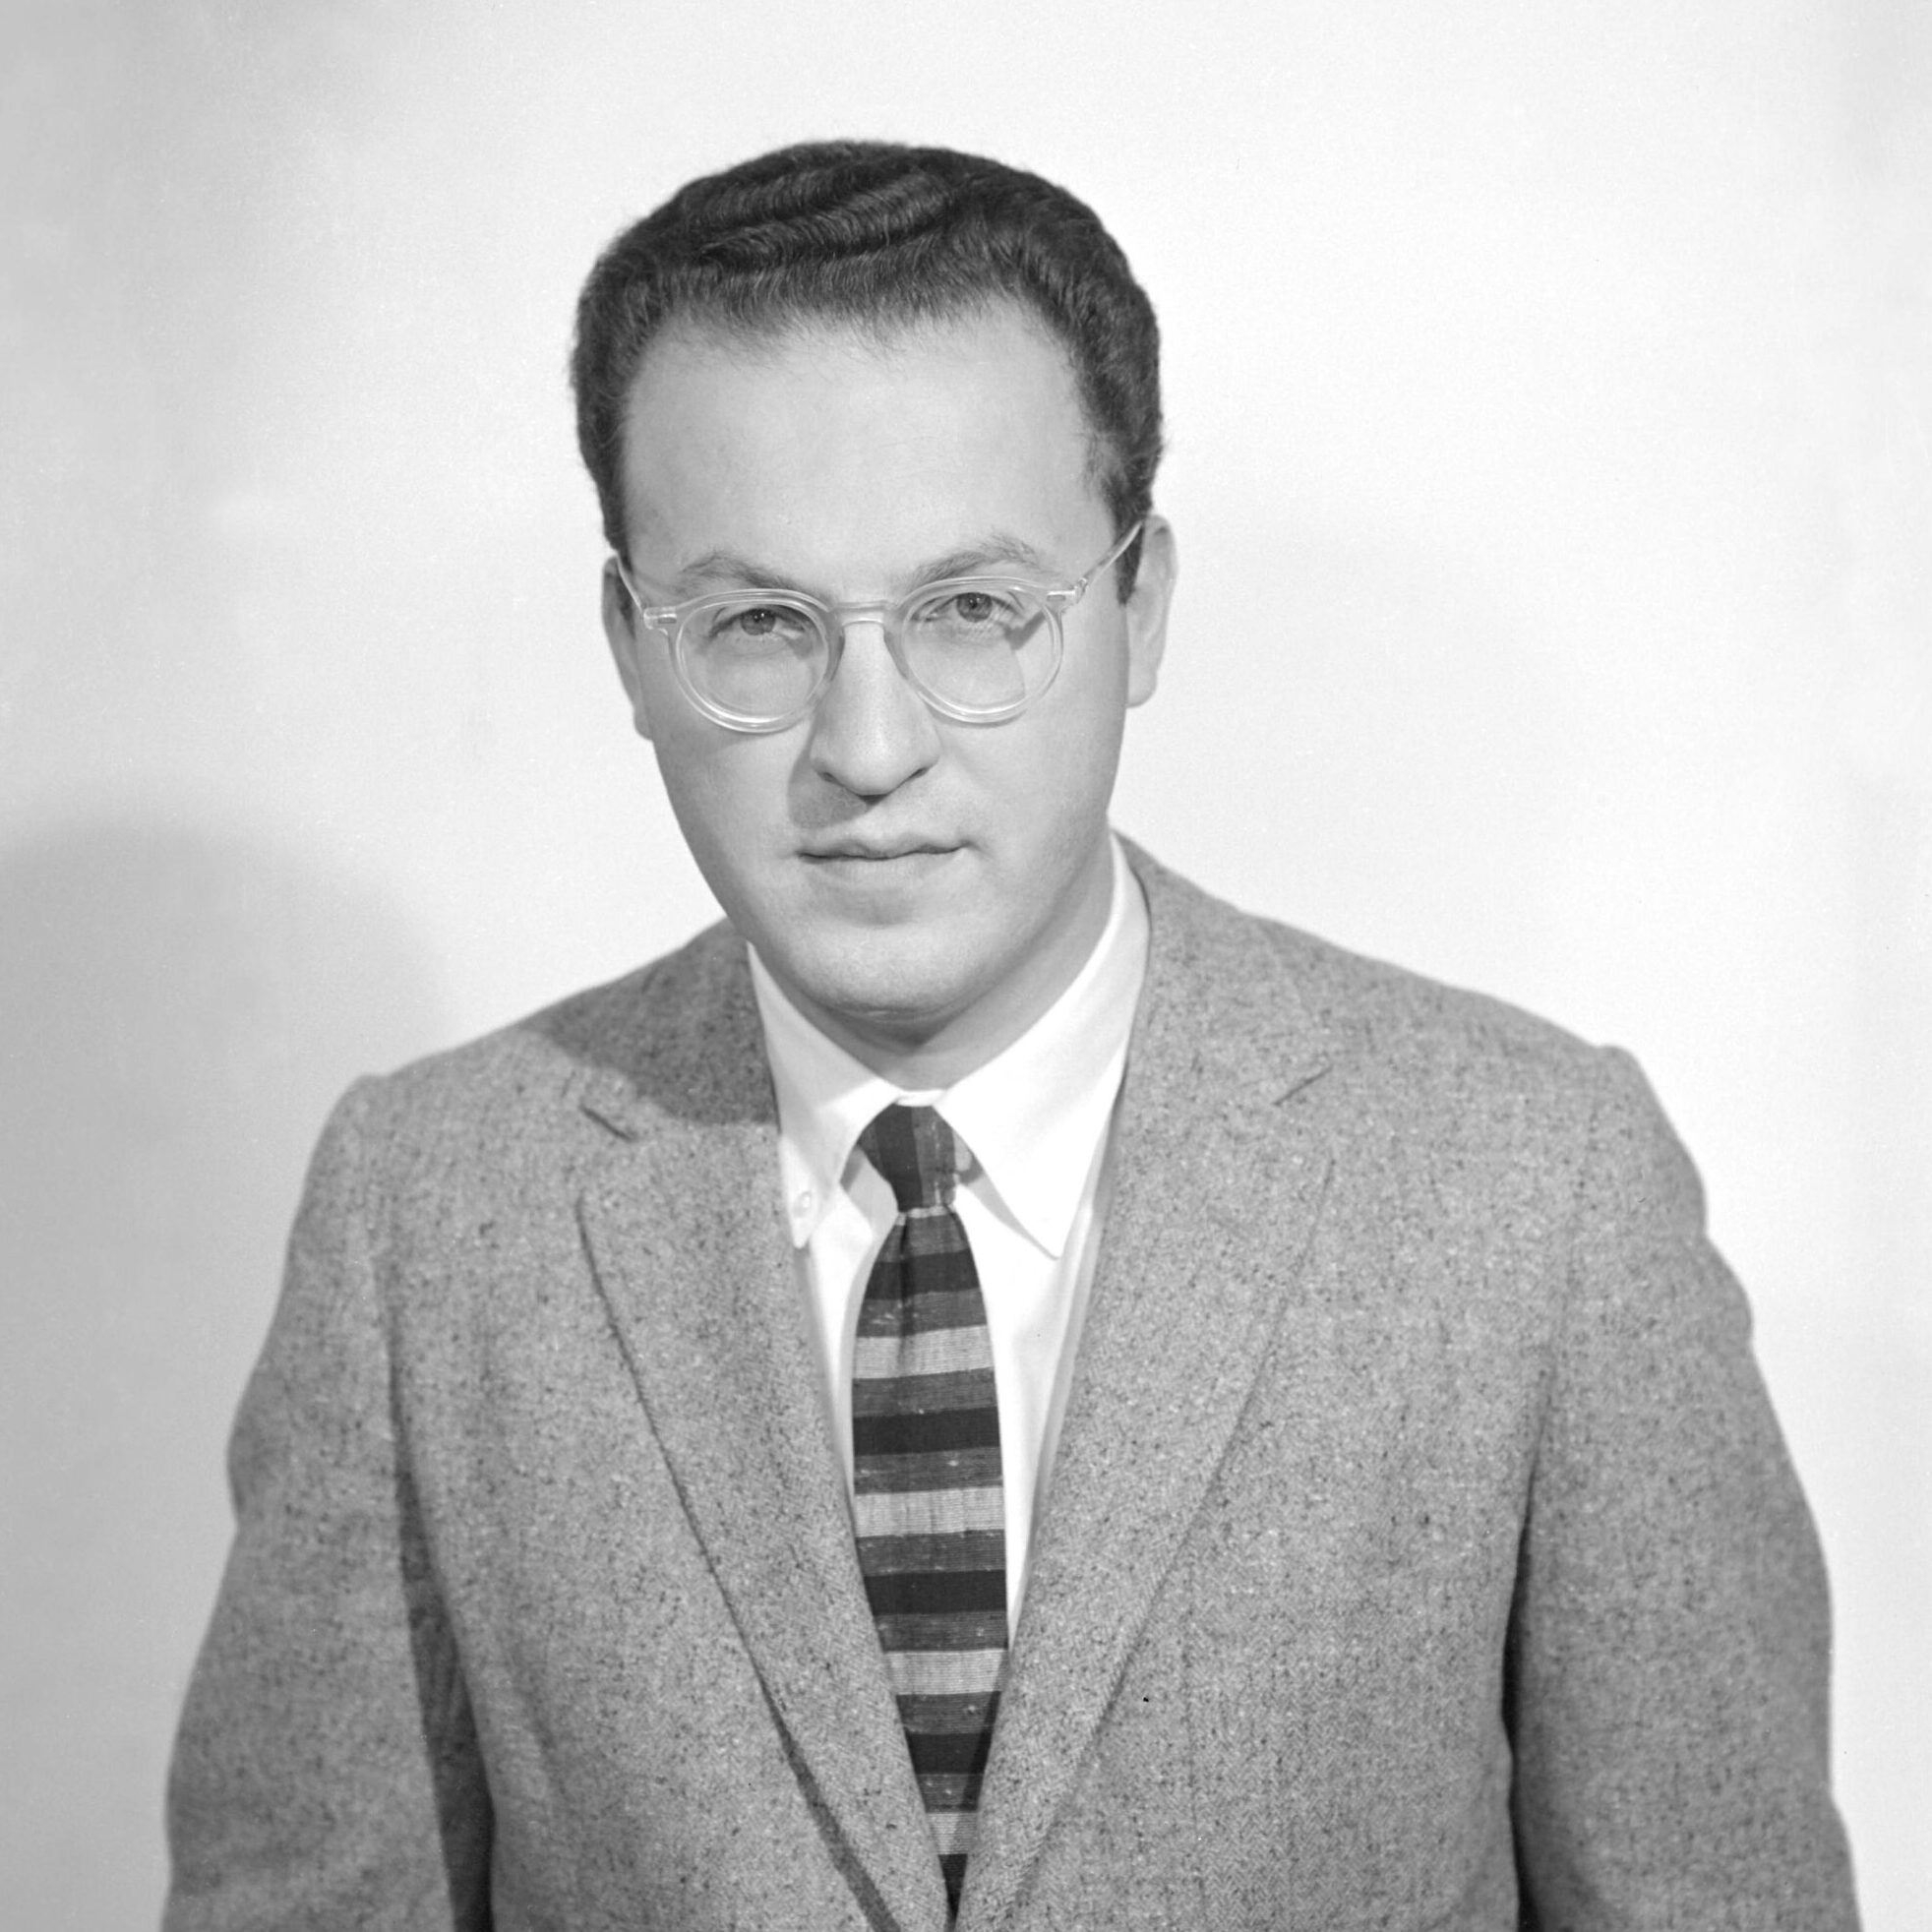 Dark-haired person with glasses in a suit and tie.